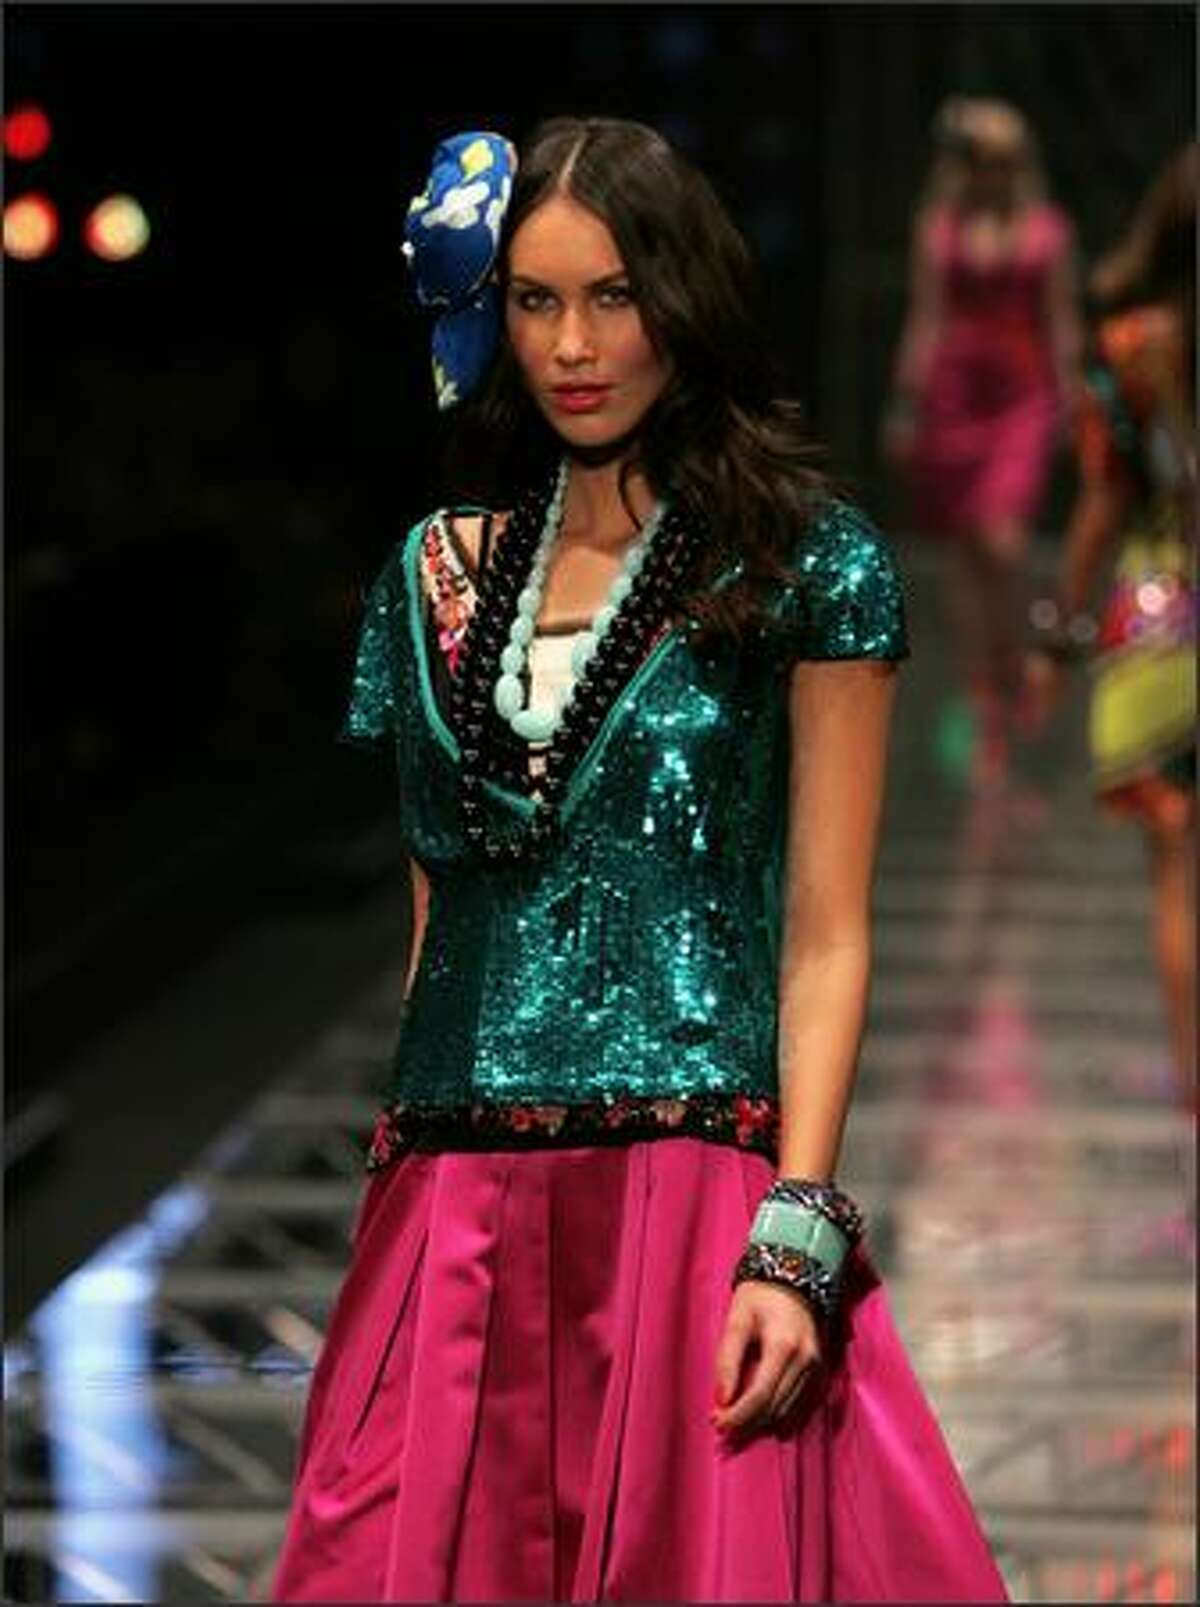 A model showcases designs by Trelise Cooper on the catwalk at the David Jones Summer 2008 Collections Launch 'Summer In The City' event at the Royal Hall of Industries in Sydney, Australia.